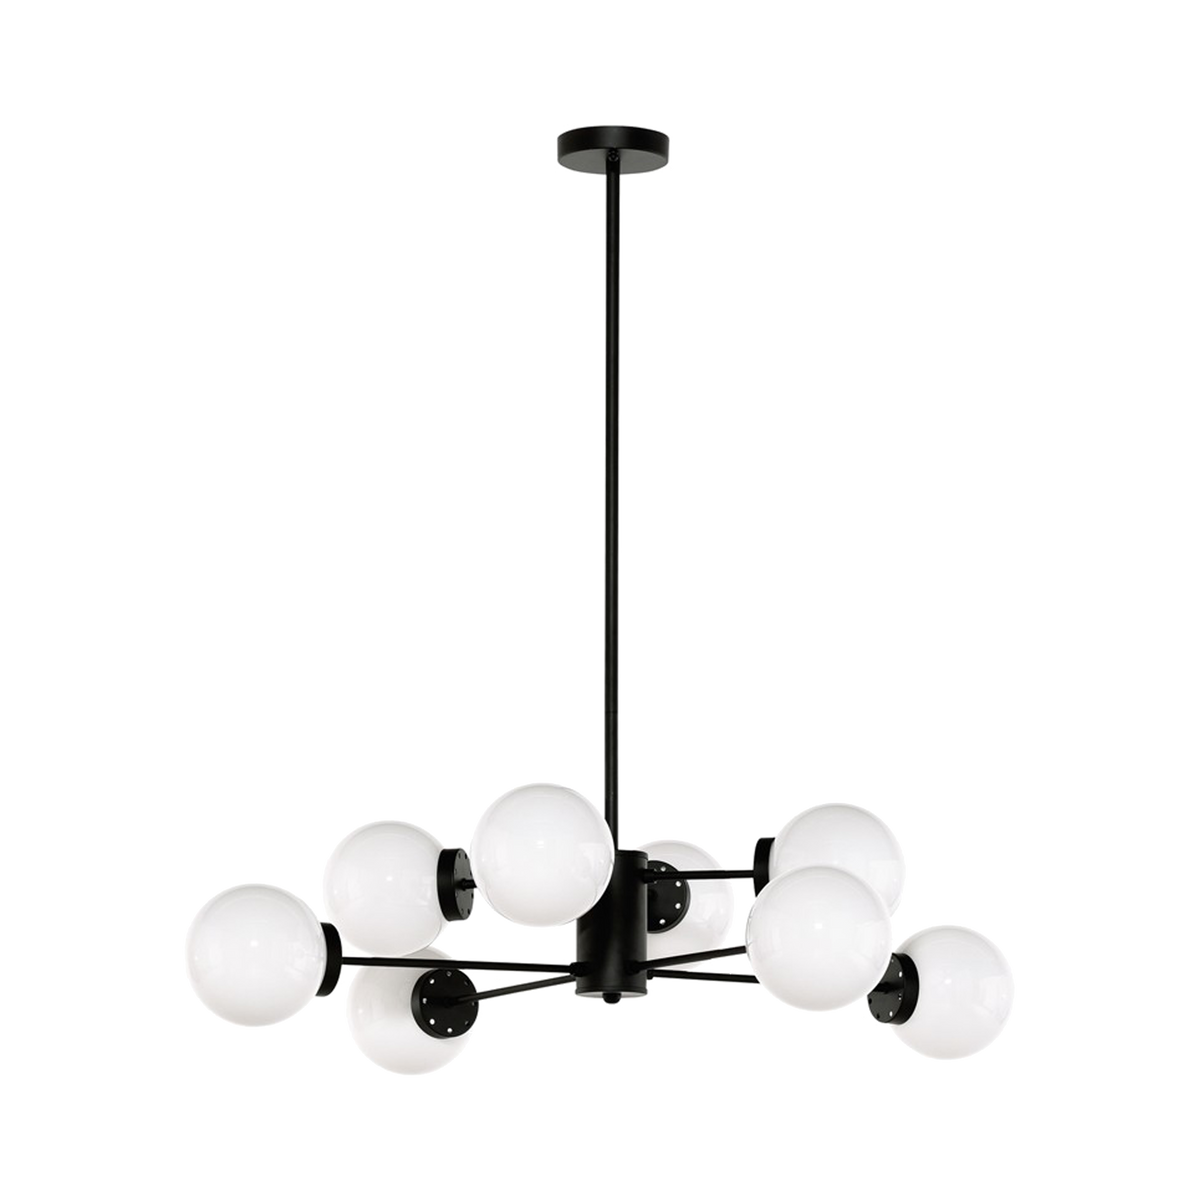 The Volcan pendant features 8 round white-glass shades, radiating outward from a simple, cylindrical stem presenting an elegant contemporary European bistro-inspired aesthetic.